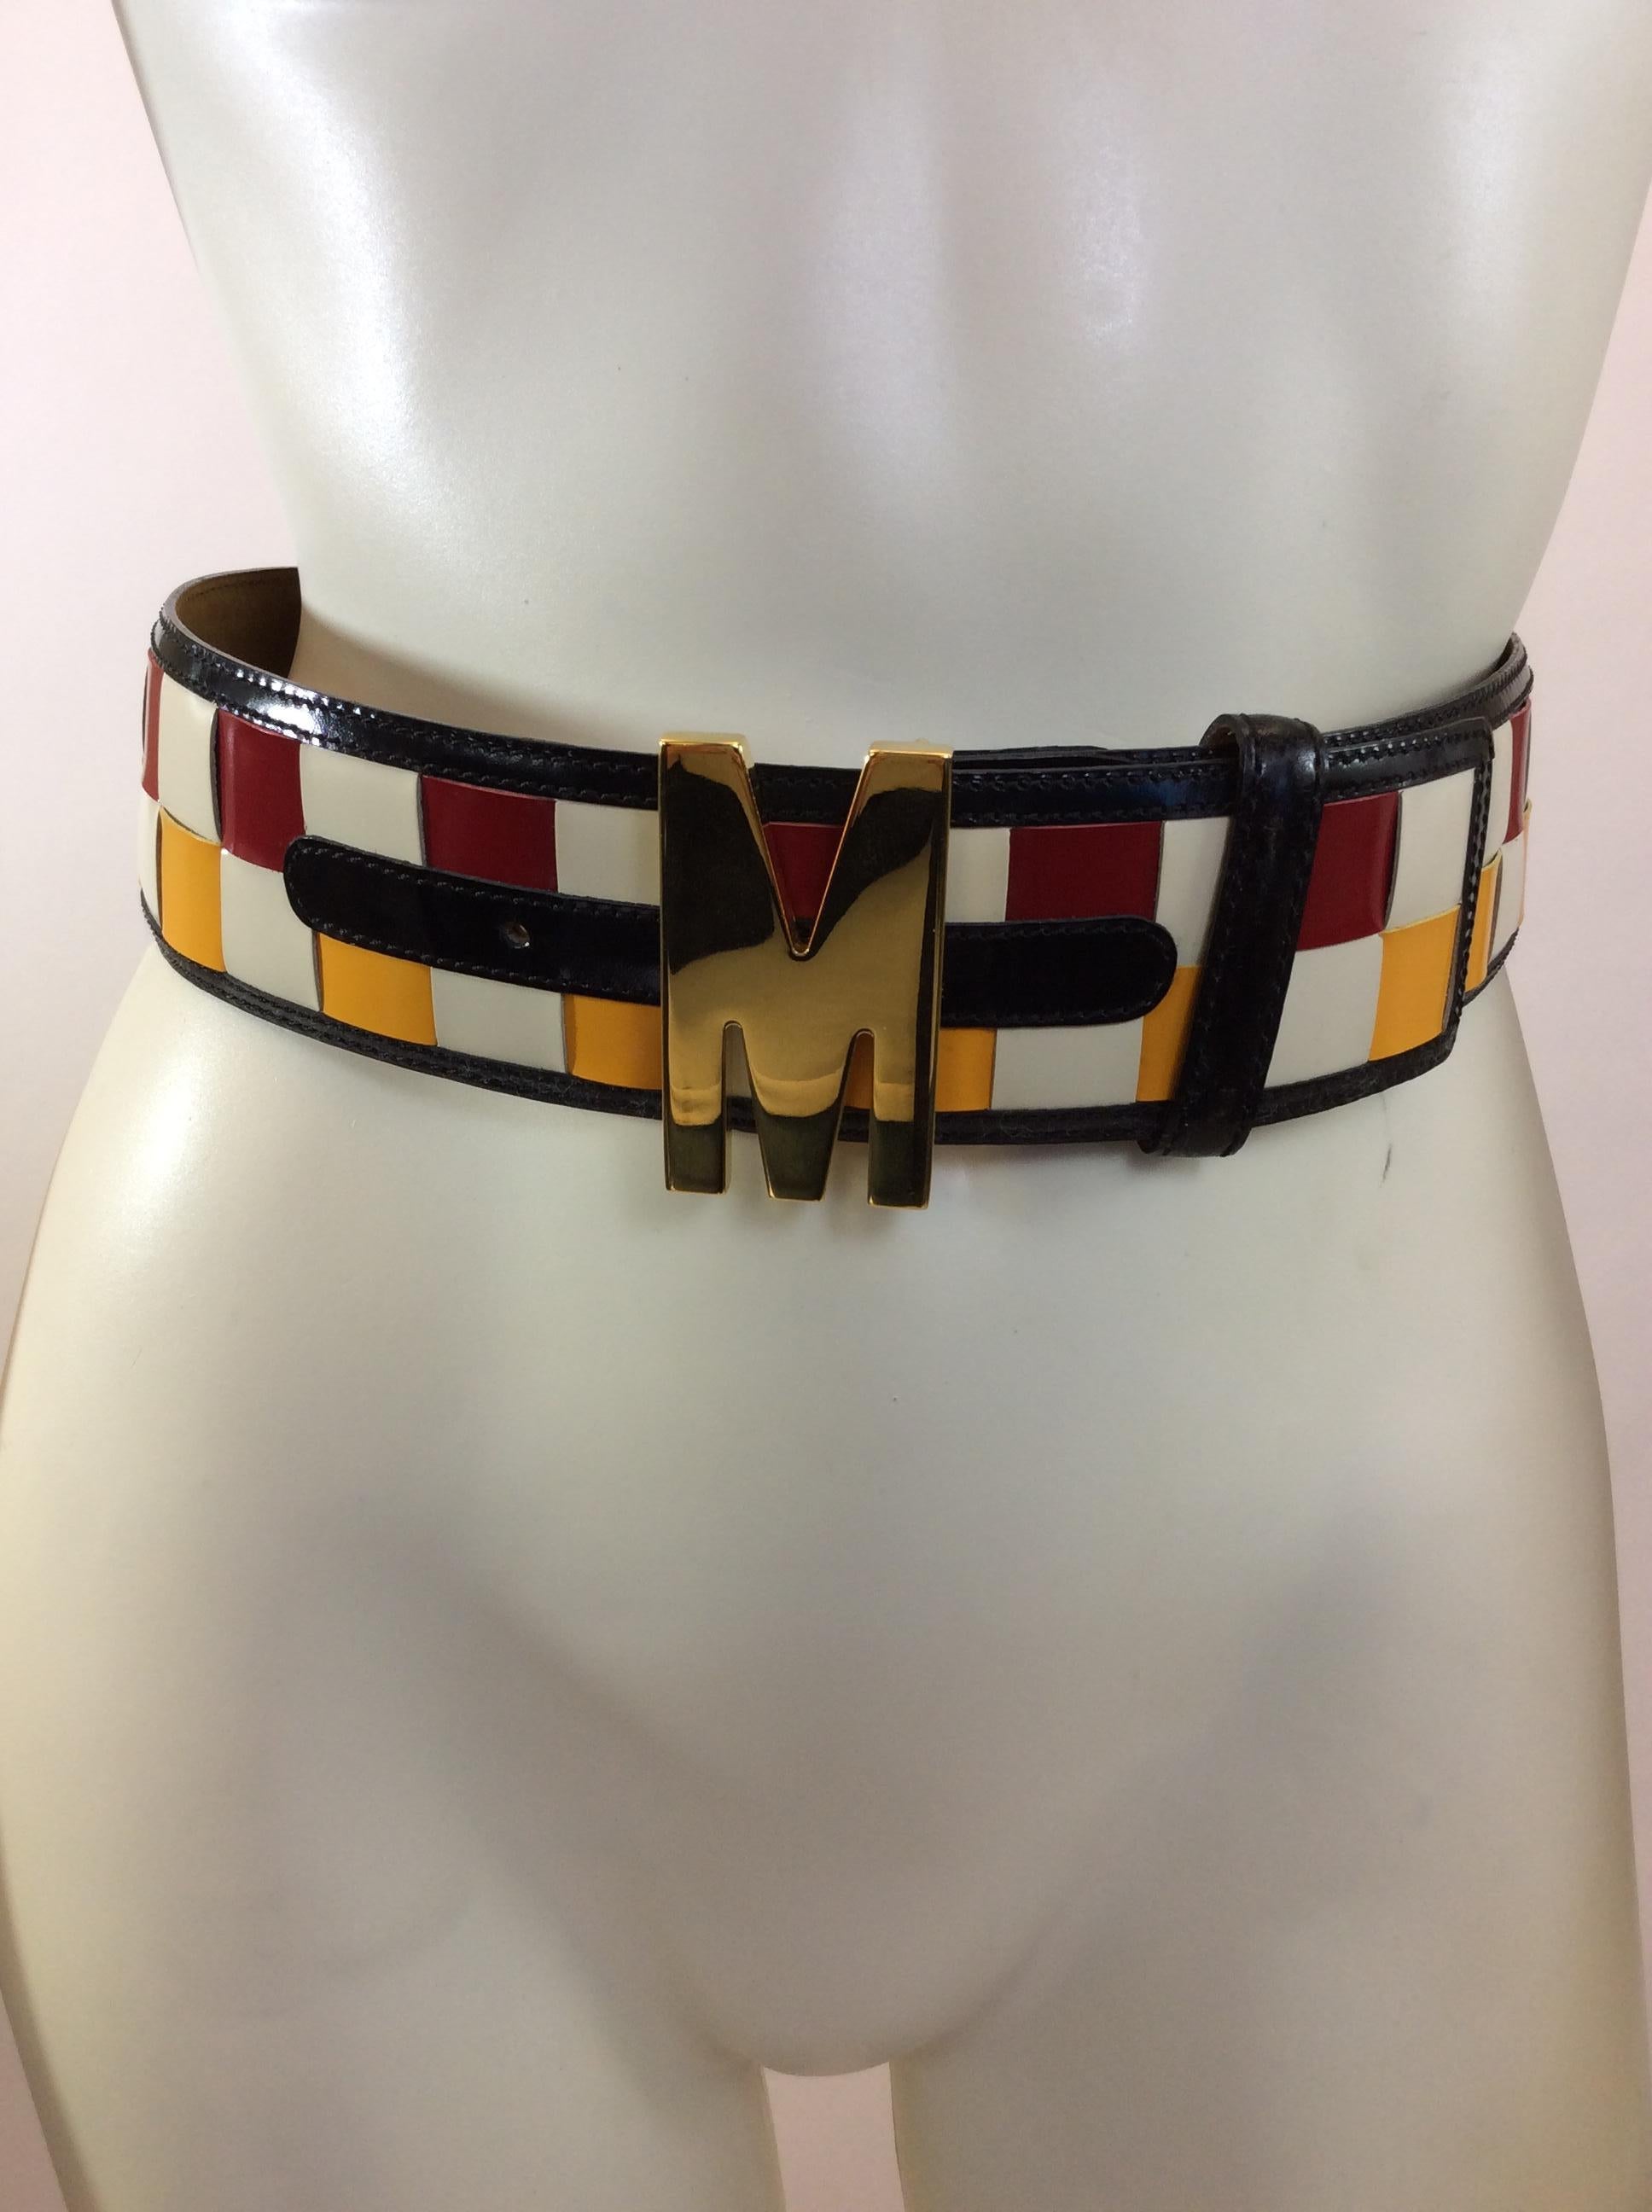 Moschino Red, Yellow, White, and Black Checkered Belt
$165
Made in Italy
Leather
Size 38
30”
